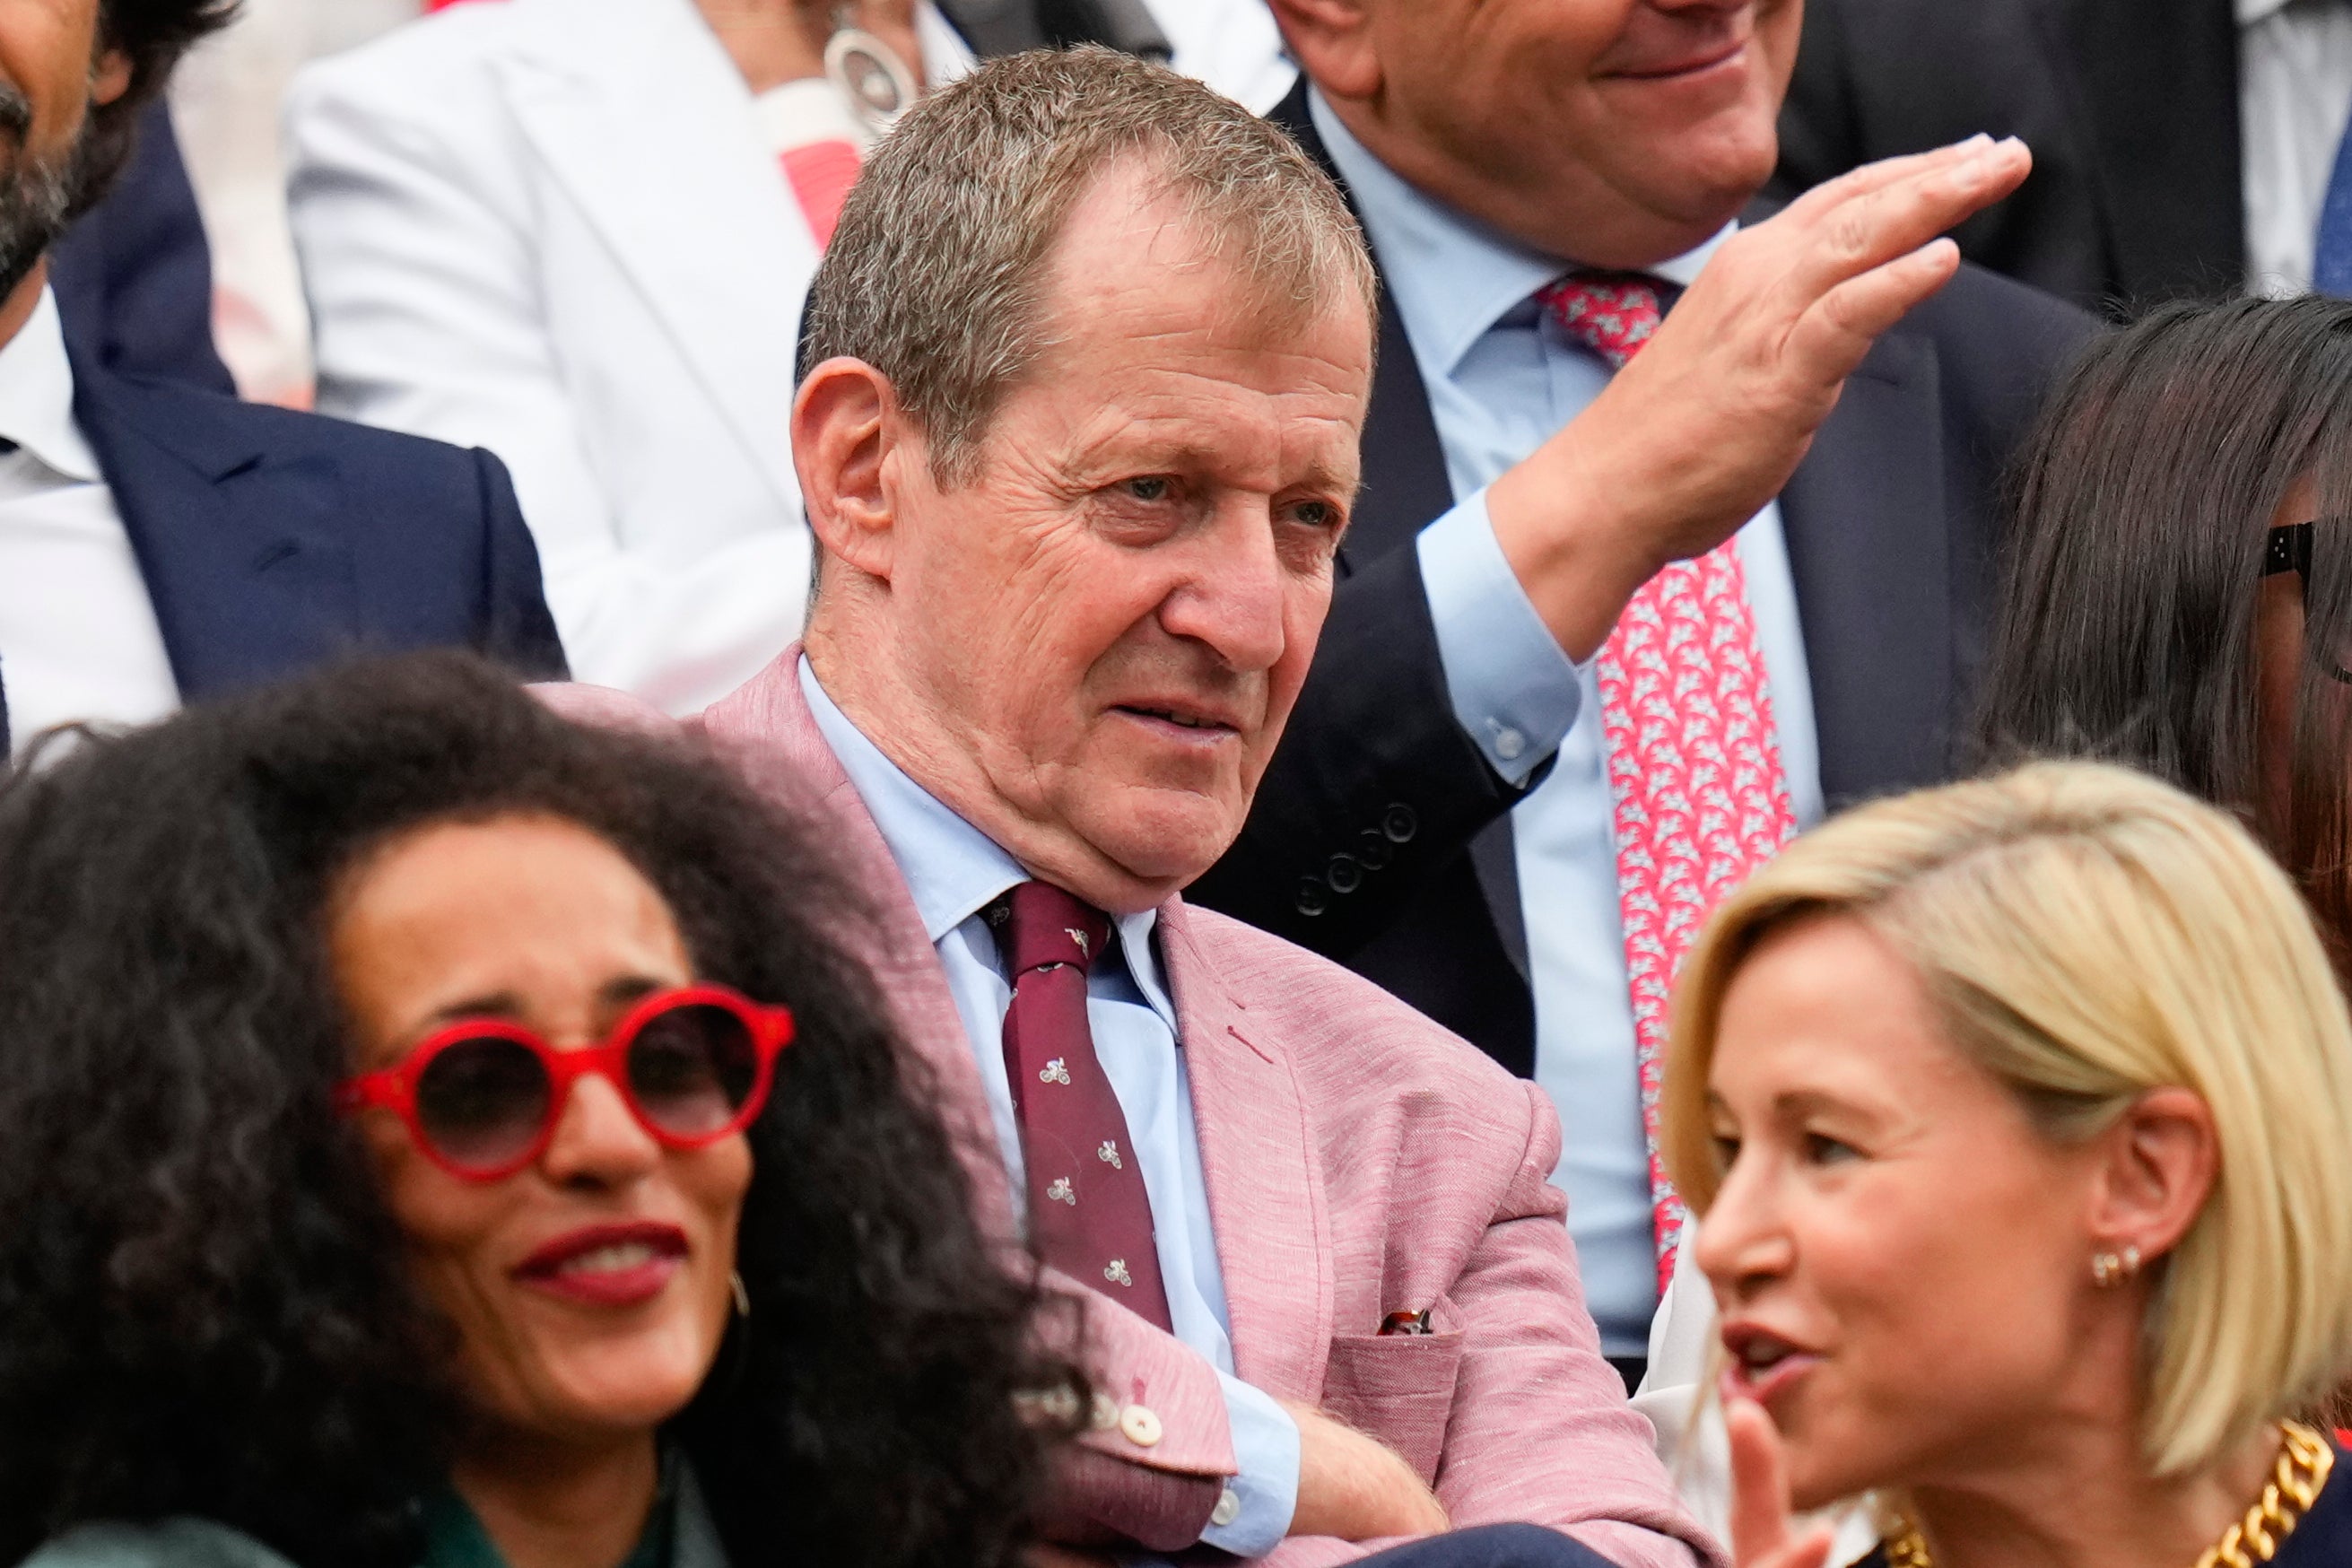 wimbledon, david attenborough, andy murray, carlos alcaraz, emma raducanu, from sir cliff richard to dave grohl: who’s who in the royal box on wimbledon day two?